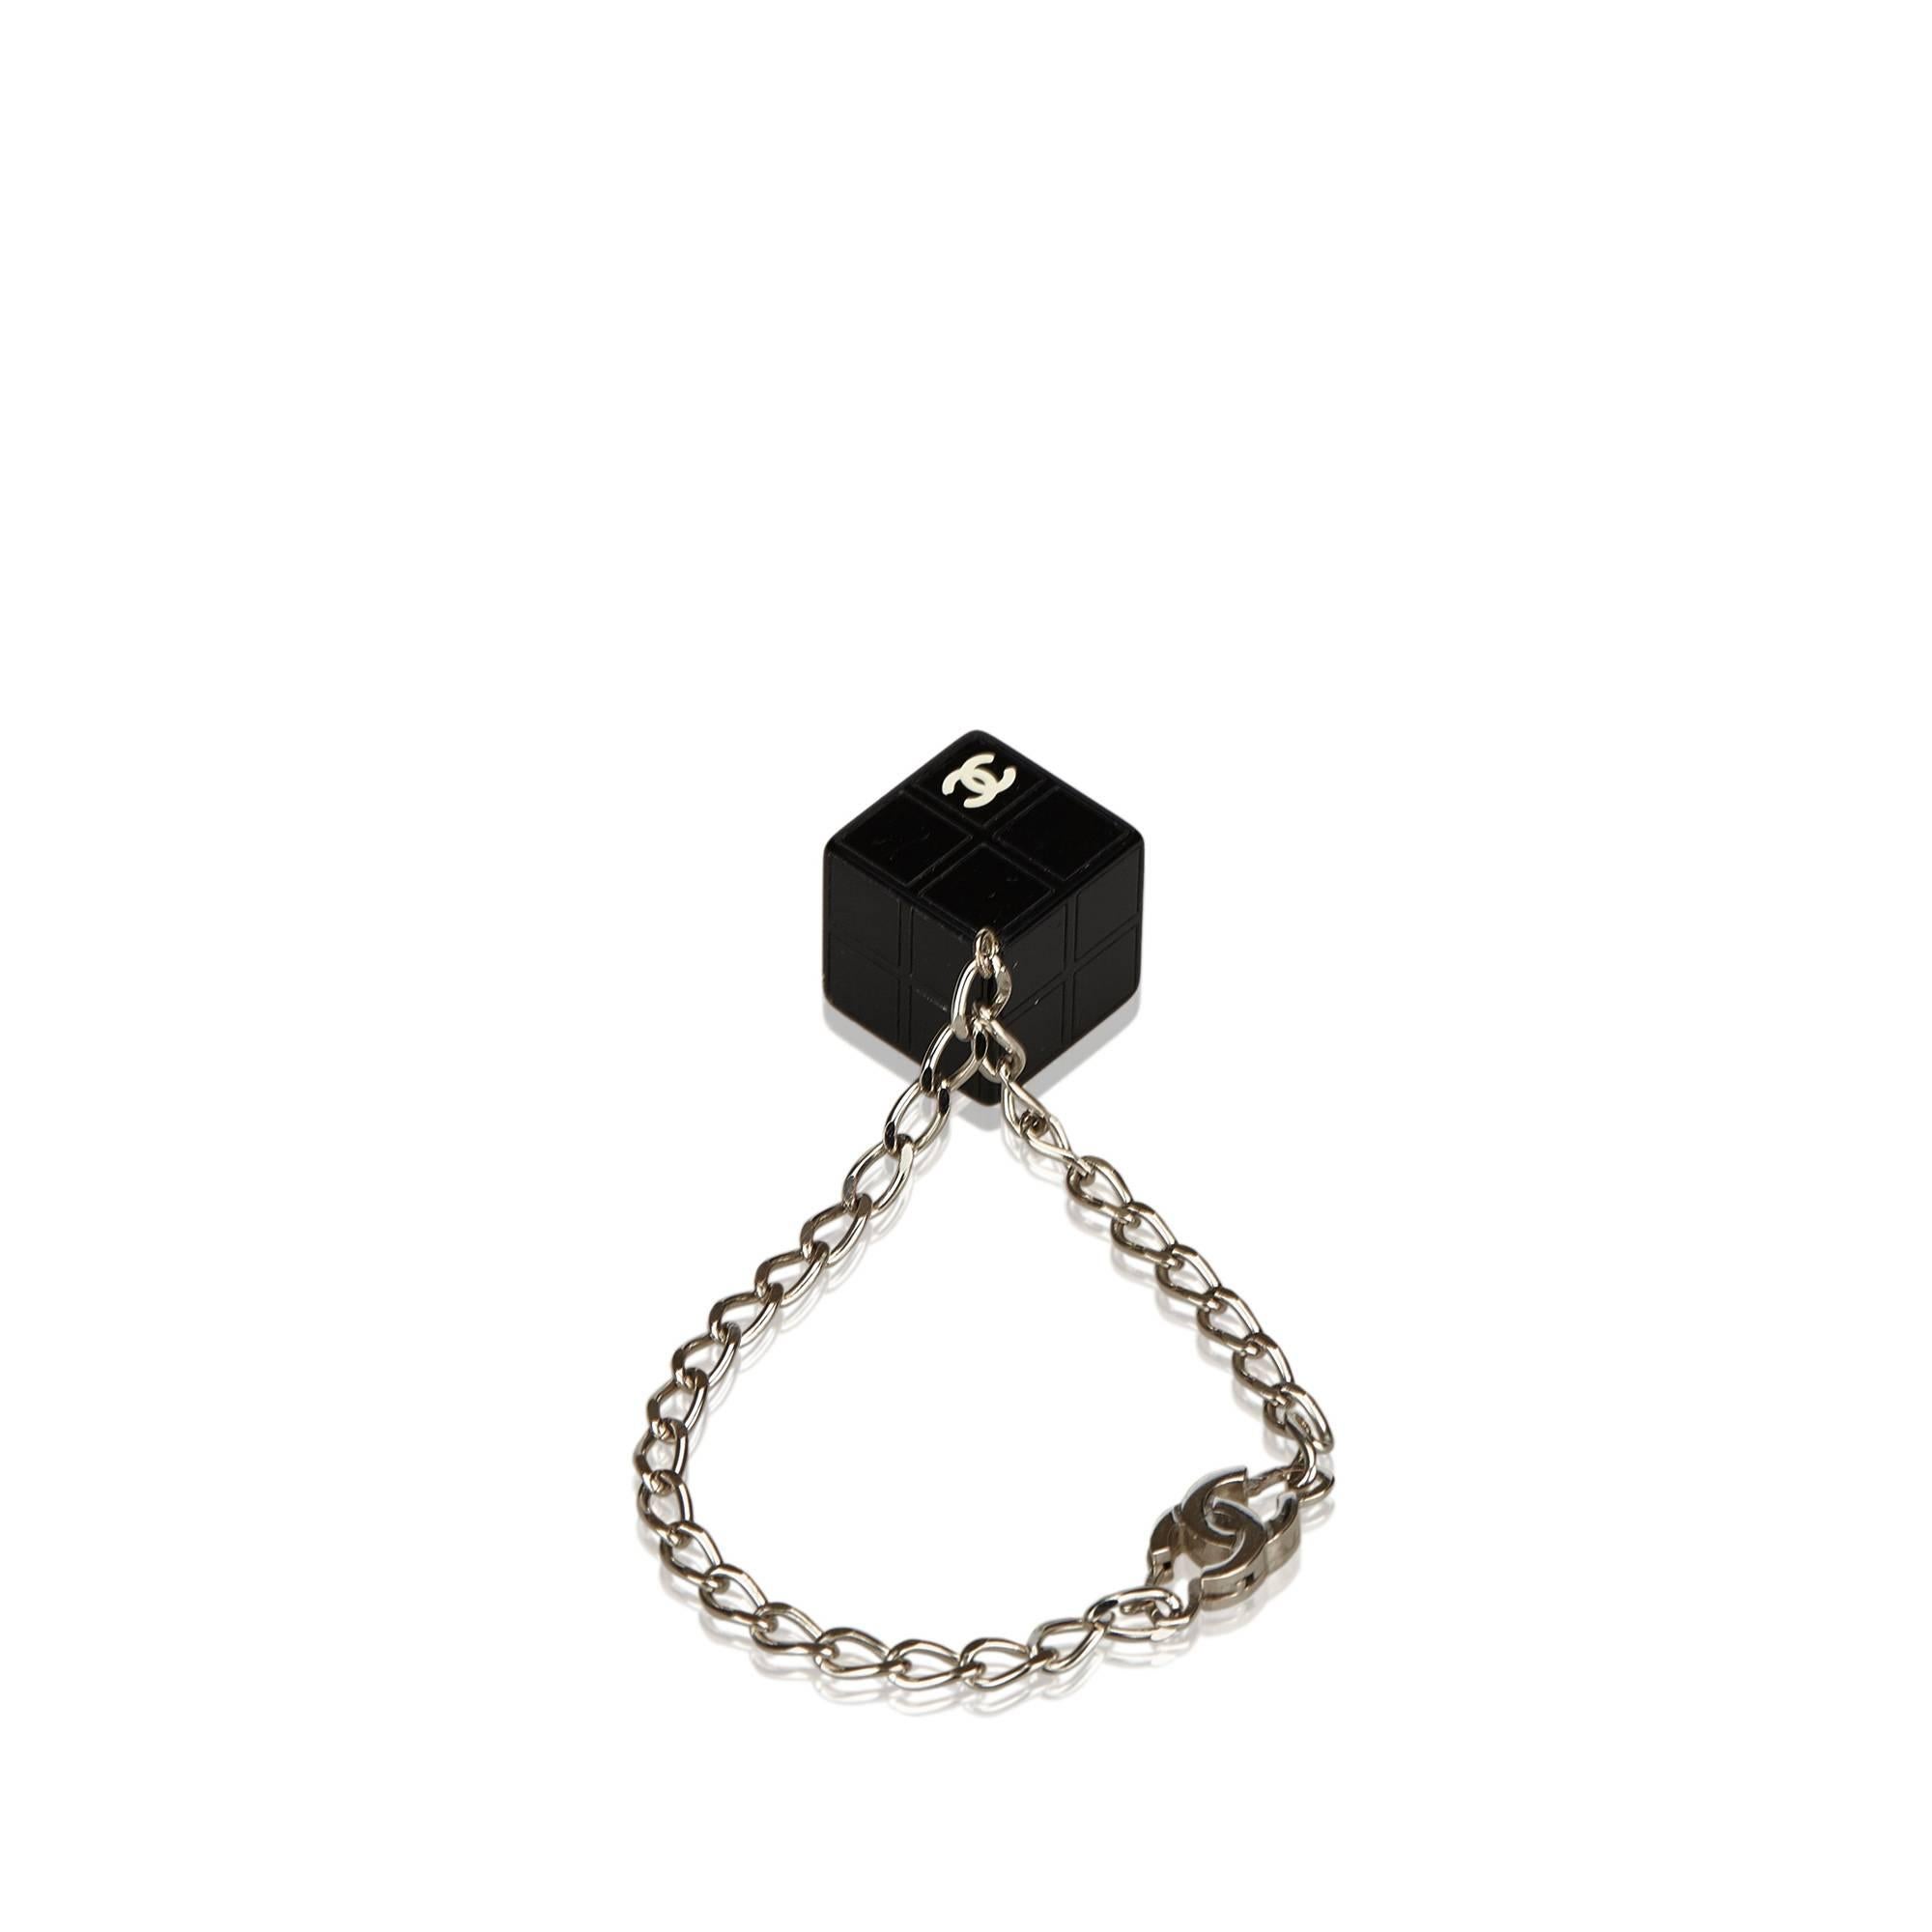 - This Chanel black bracelet features a resin cube pendant, silver-tone chain, and a hook closure.

- Size: 0.5cm x 19cm. 

- Serial no: 04S. 

- Color: Black x Silver. 

- Condition: We would rate it 6.5 out of 10. Since this is a vintage item,